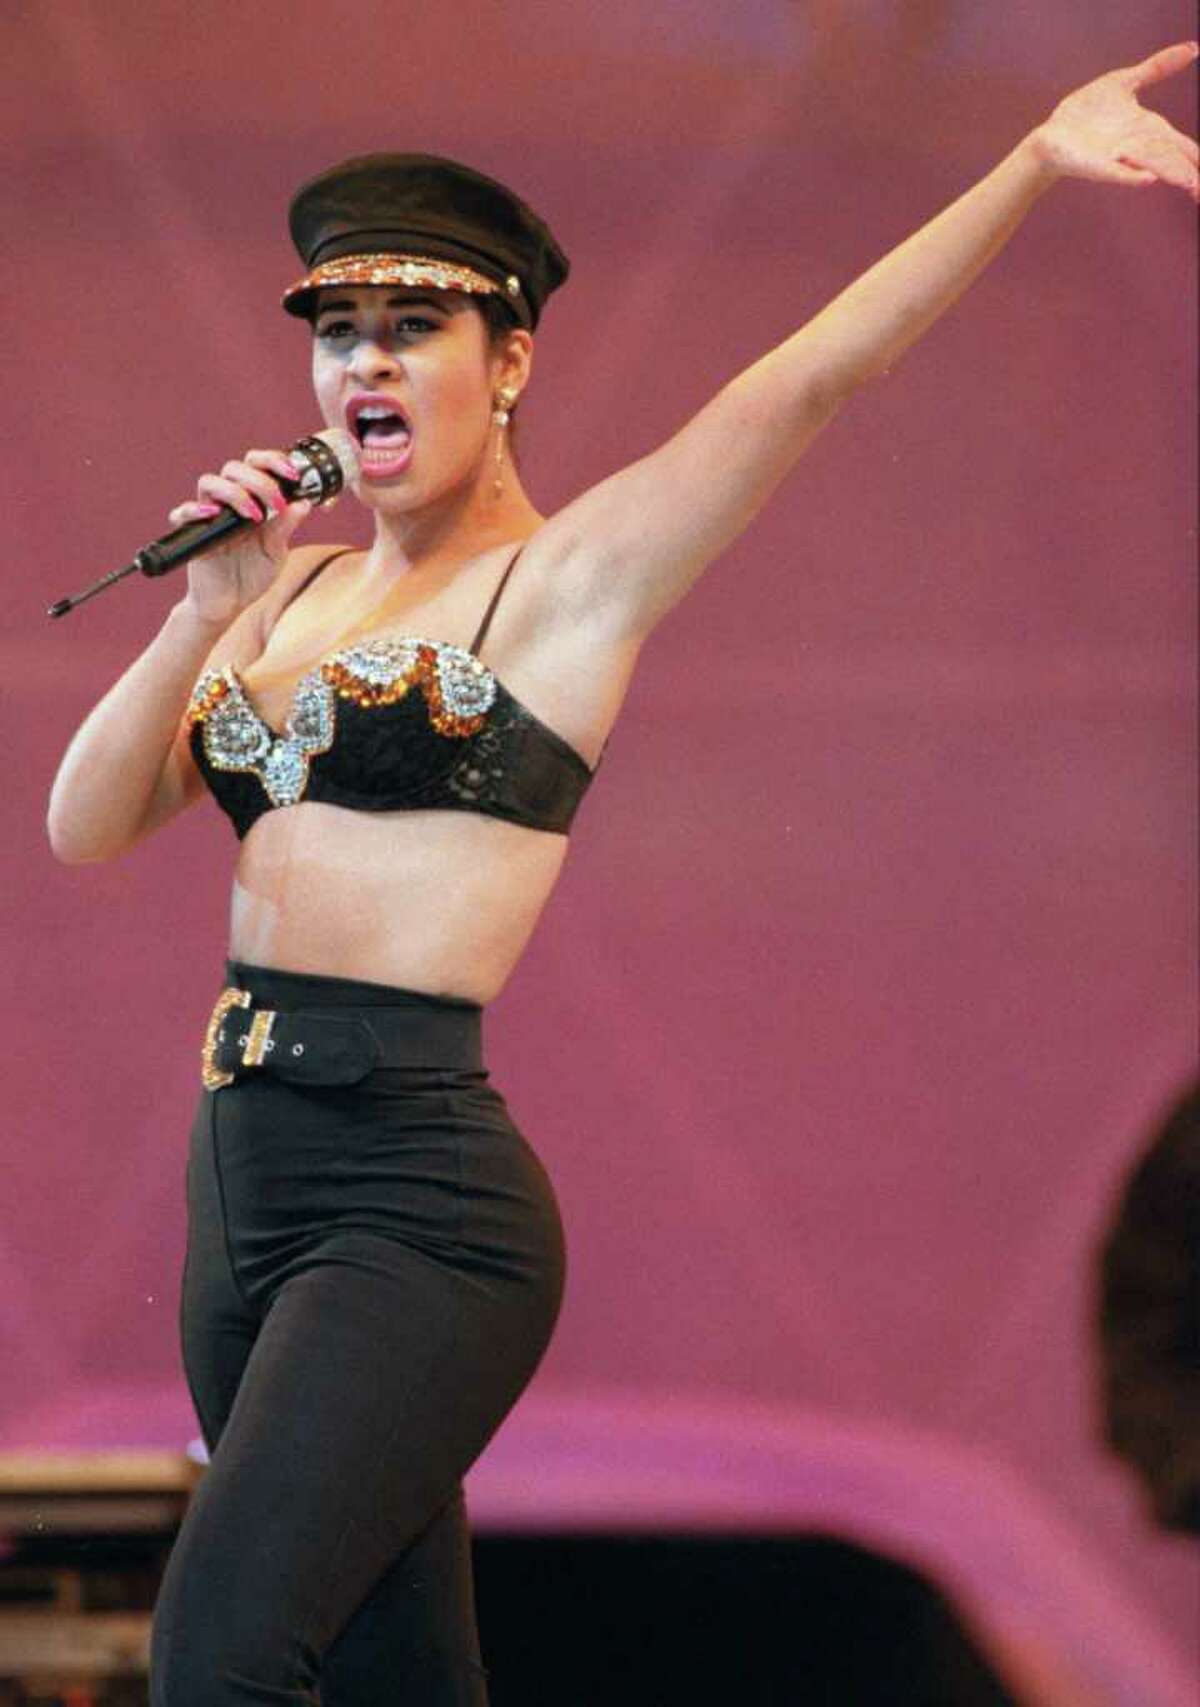 In 1993, Selena performed in front of a then-record crowd of 66,994 at the Astrodome.